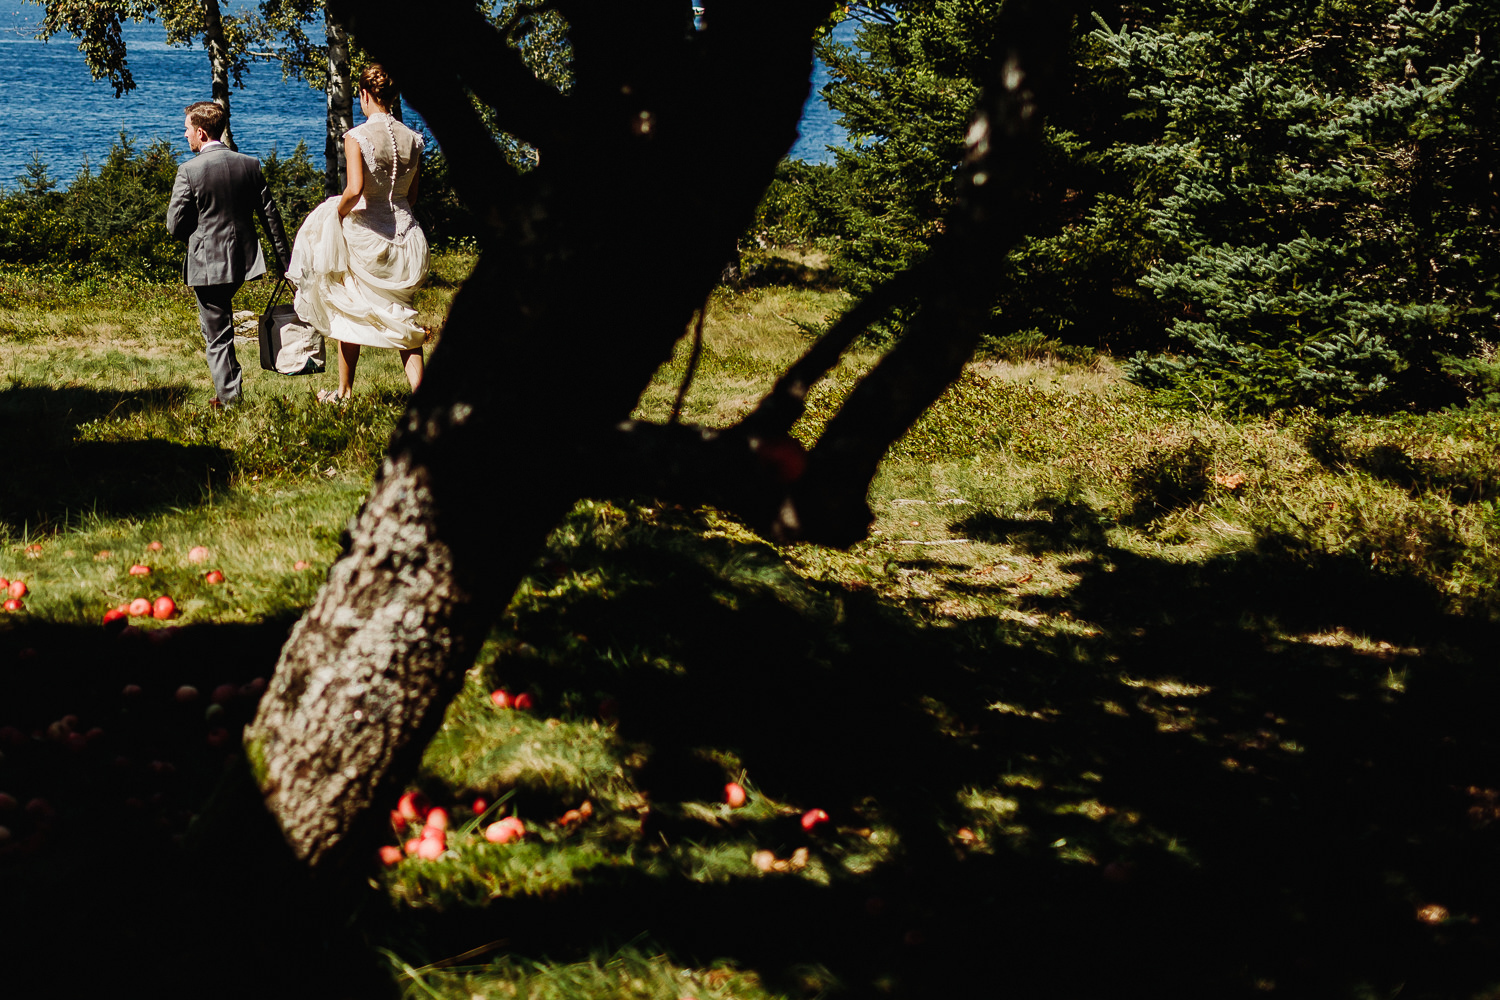 Bride and groom walking by apple trees on Sutton Island, Maine